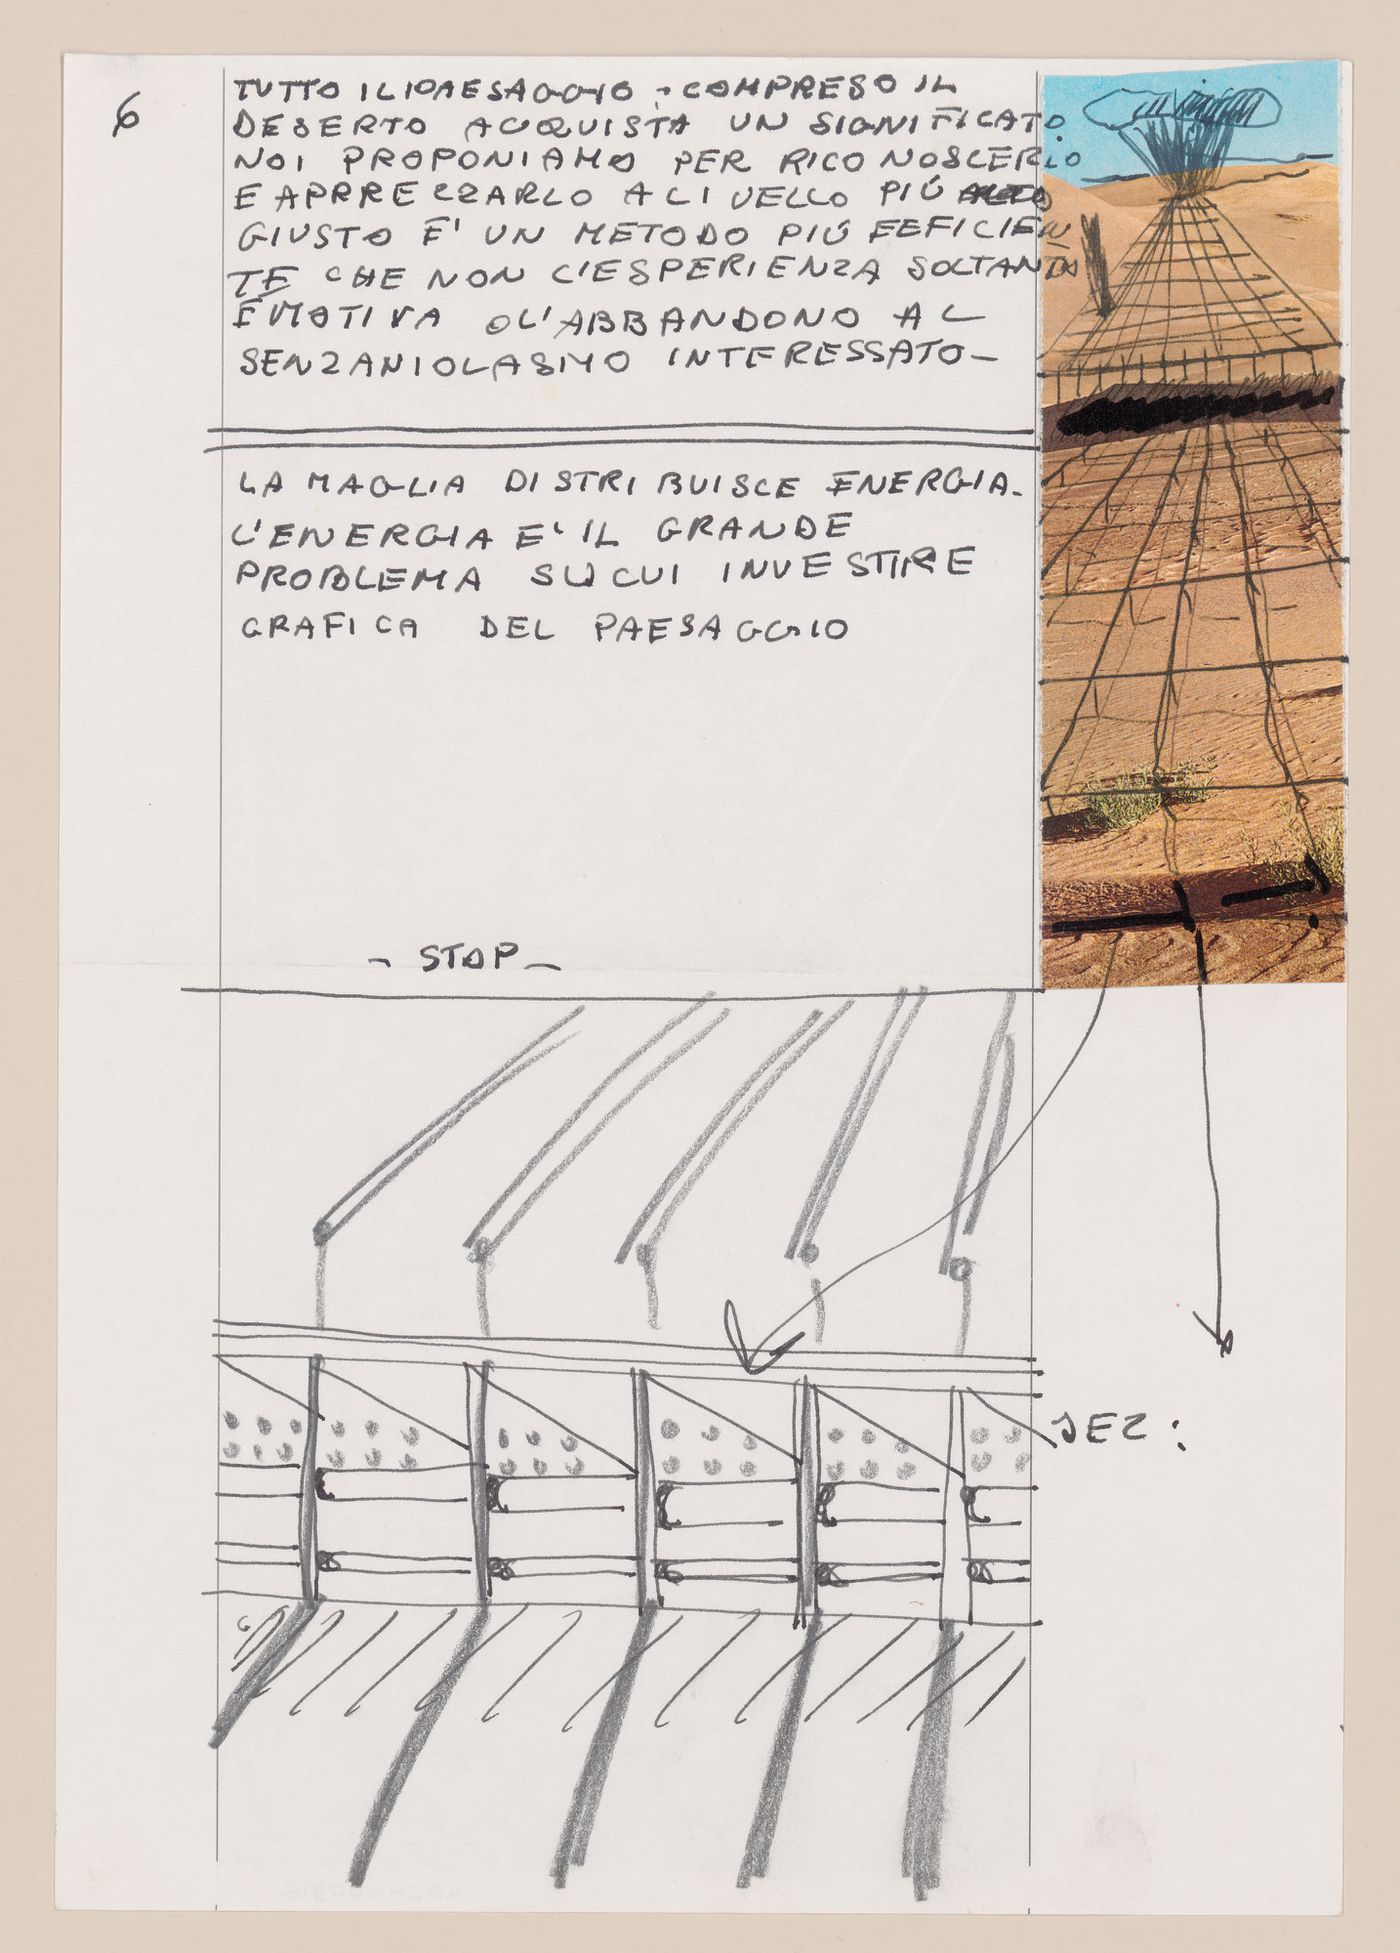 Page 5 of a storyboard describing filming locations and planning sketches of various scenes for Supersuperficie [Supersurface]